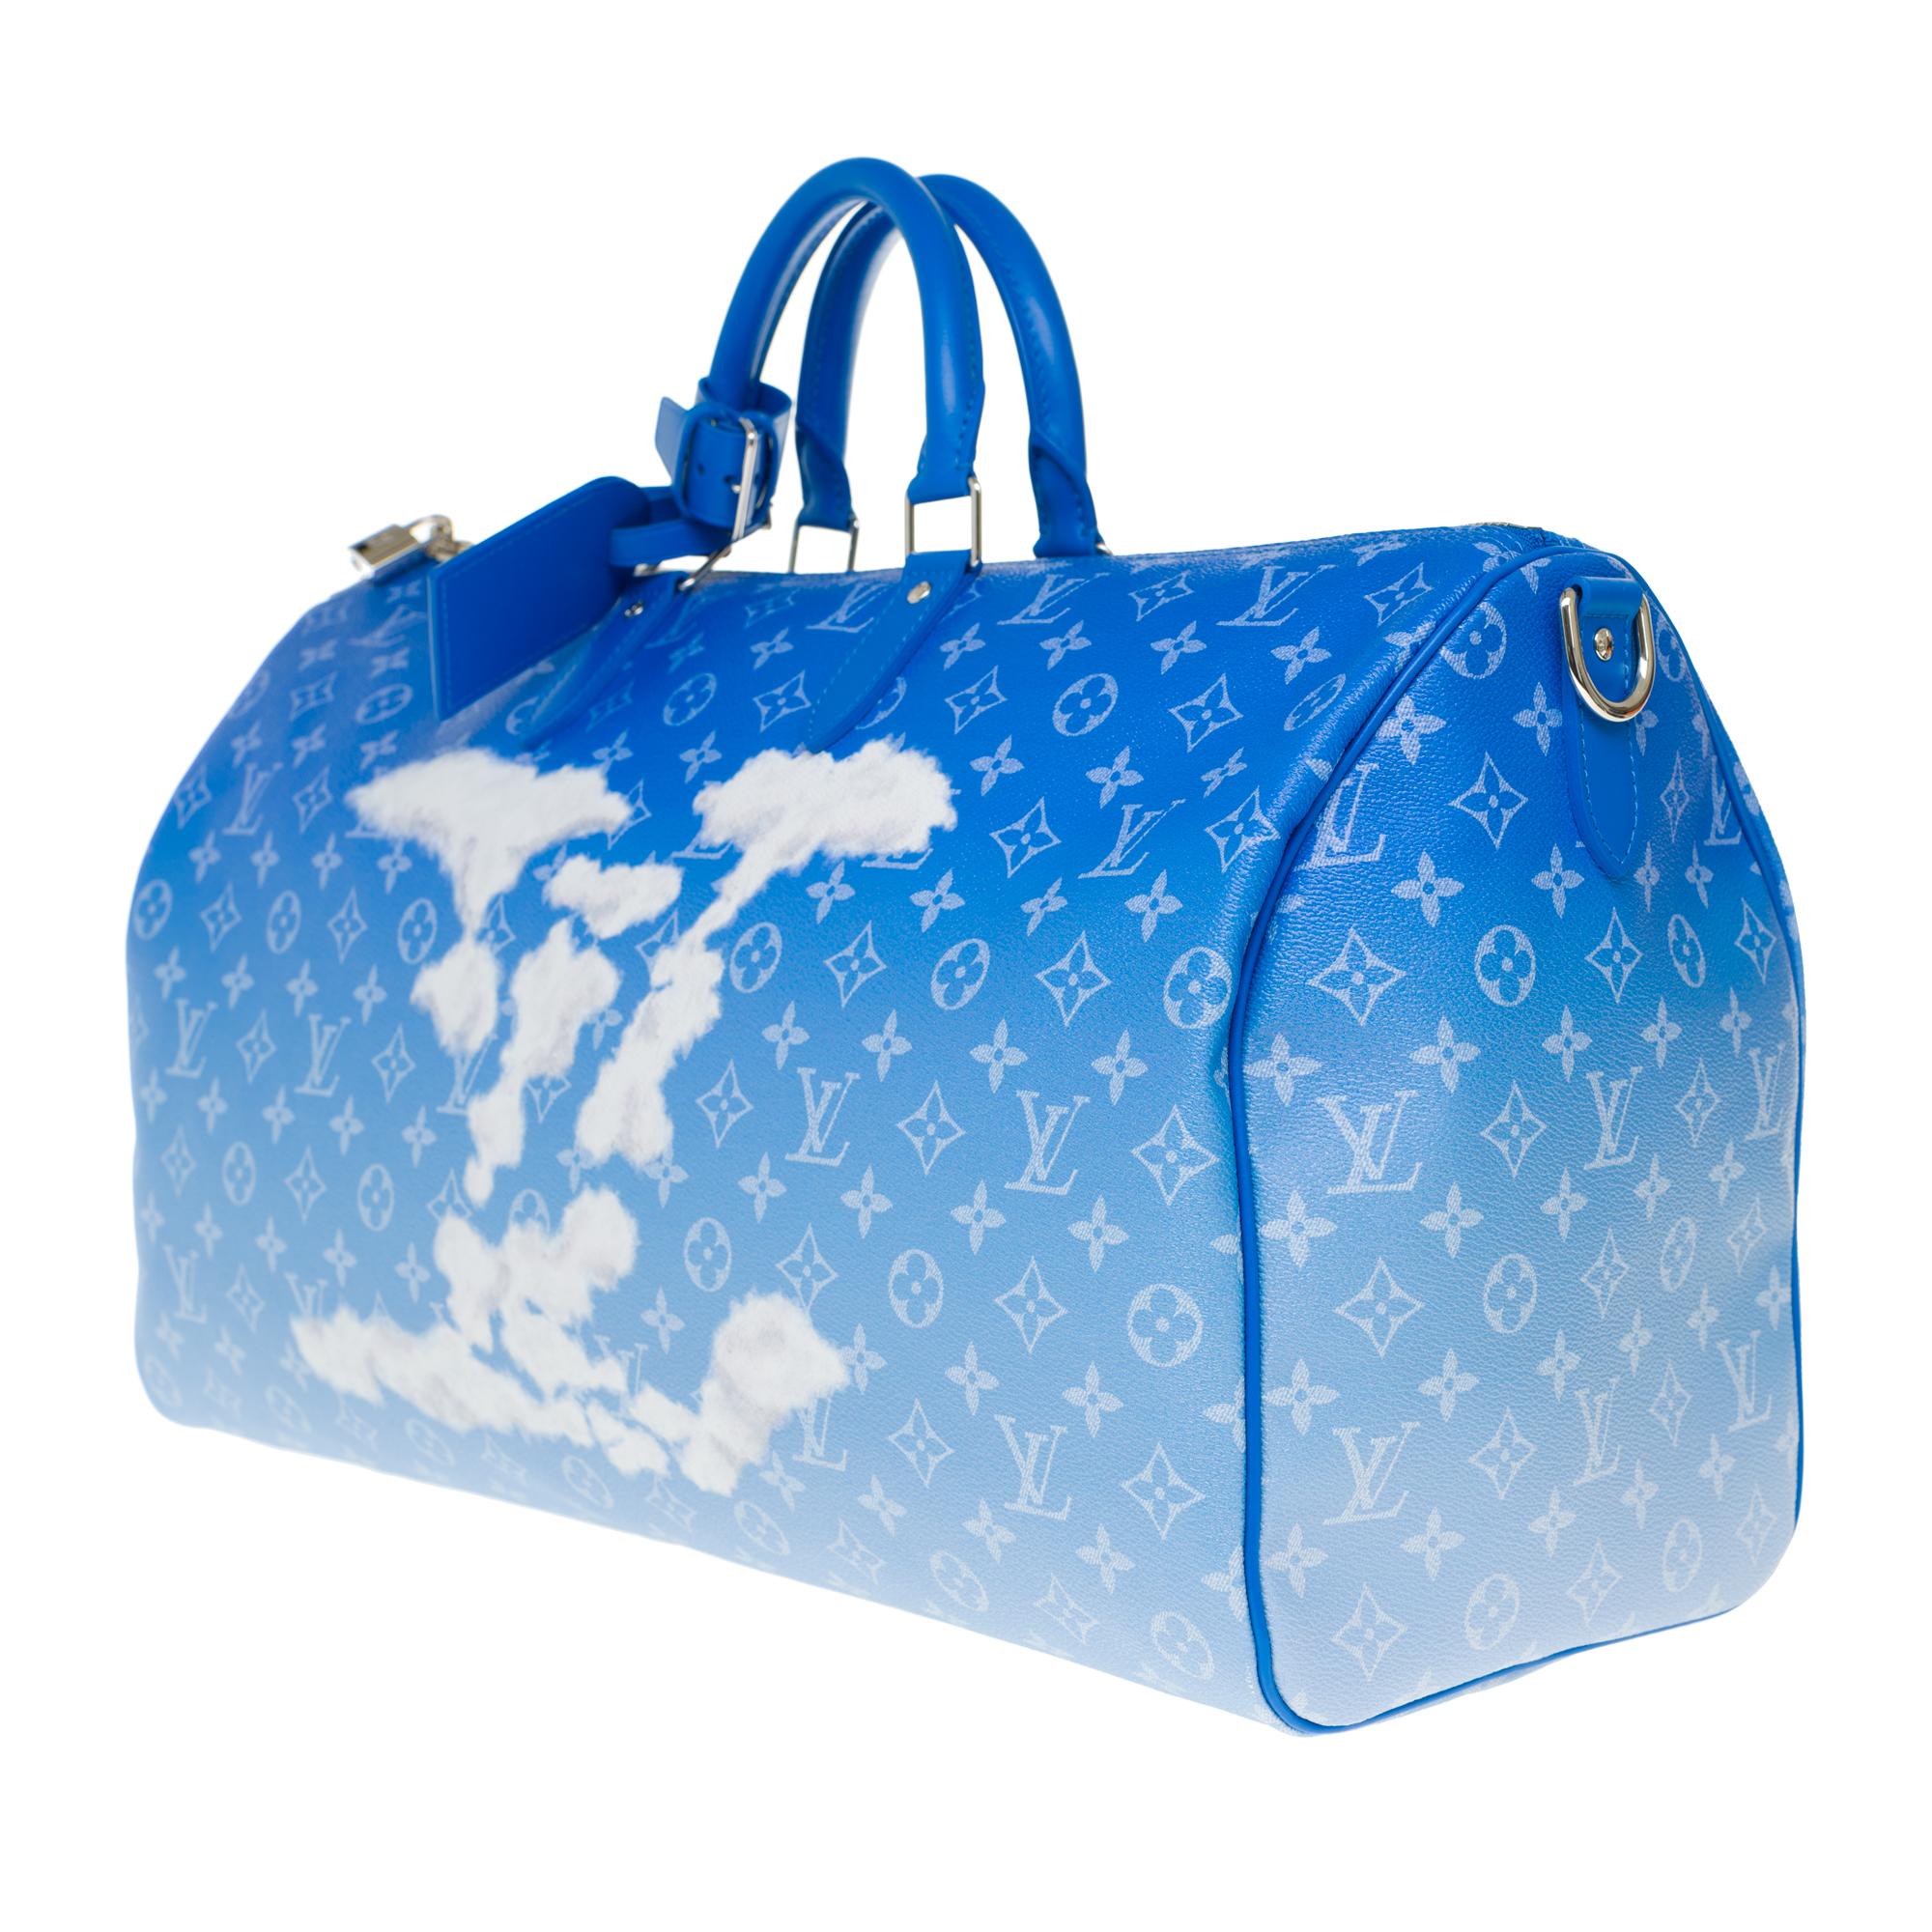 BRAND NEW-Limited edition Louis Vuitton keepall 50 Clouds virgil abloh ...